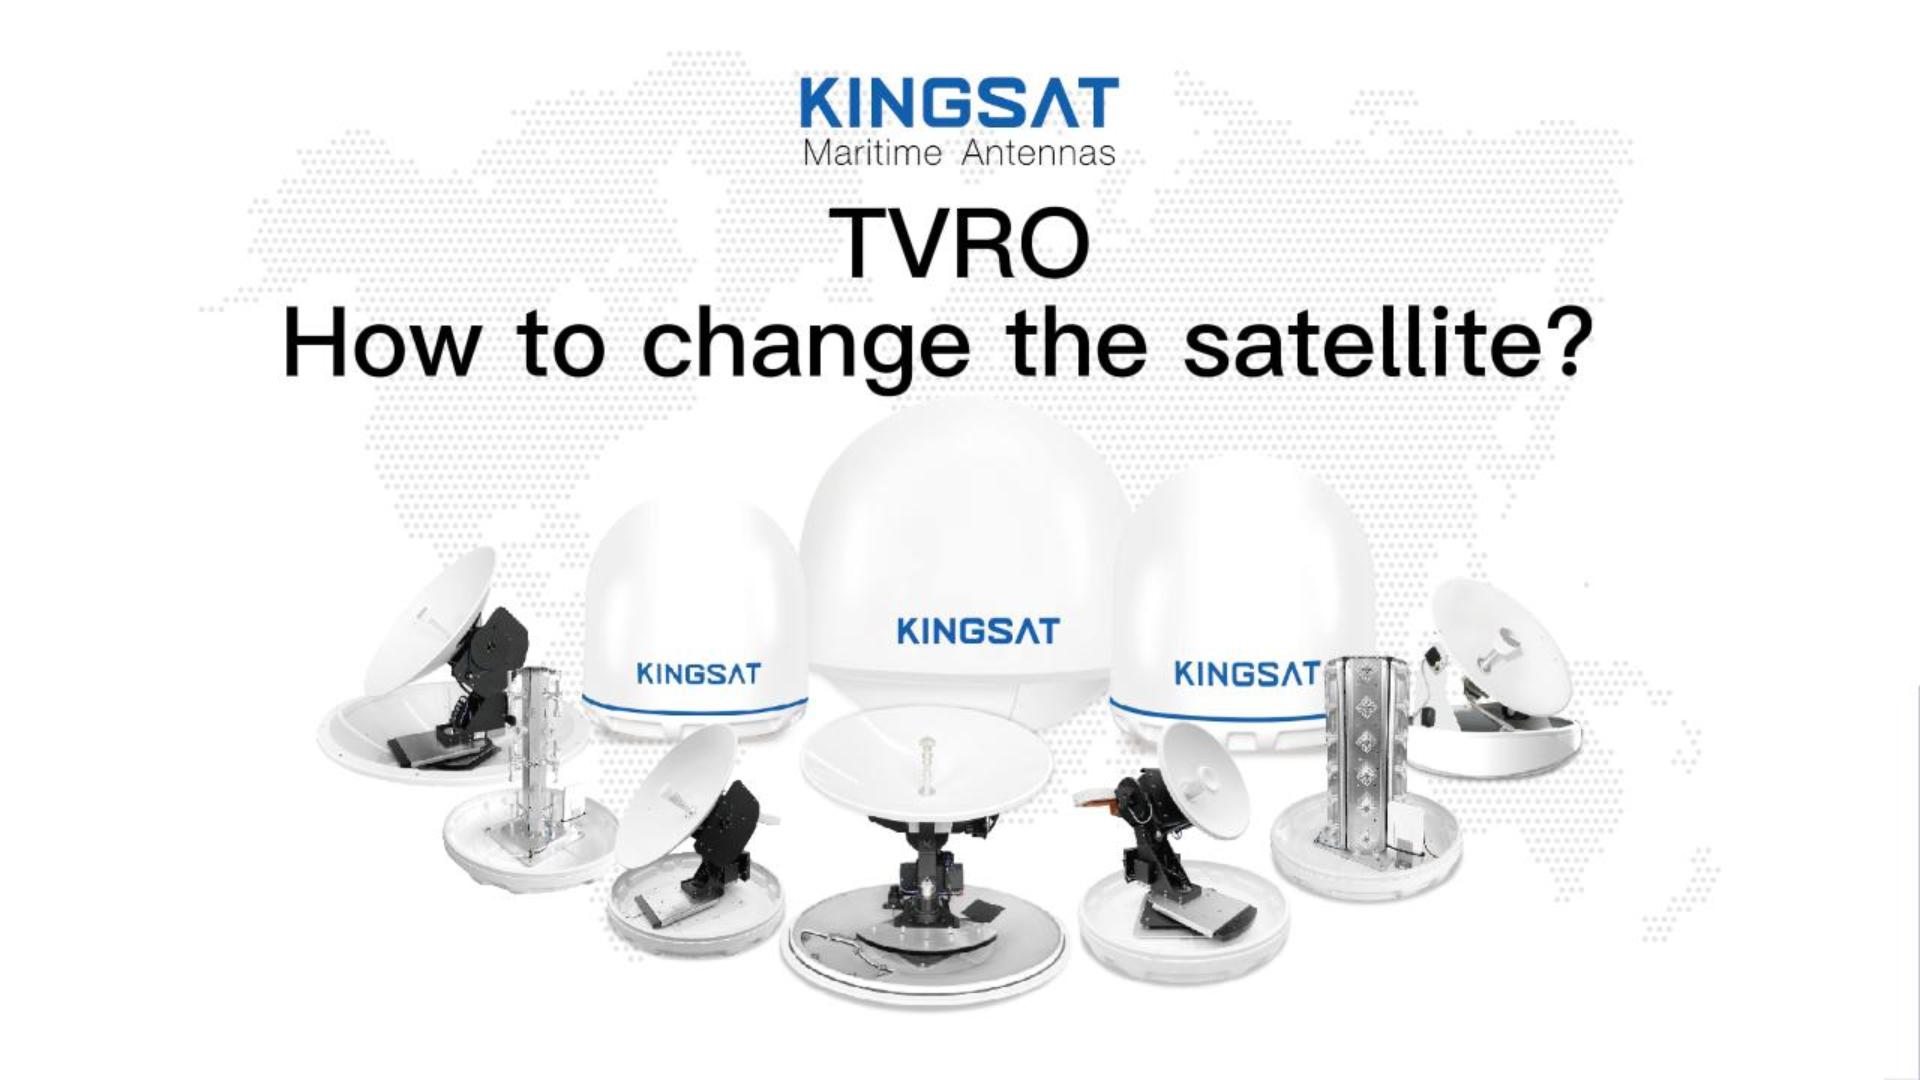 How to change the satellite？